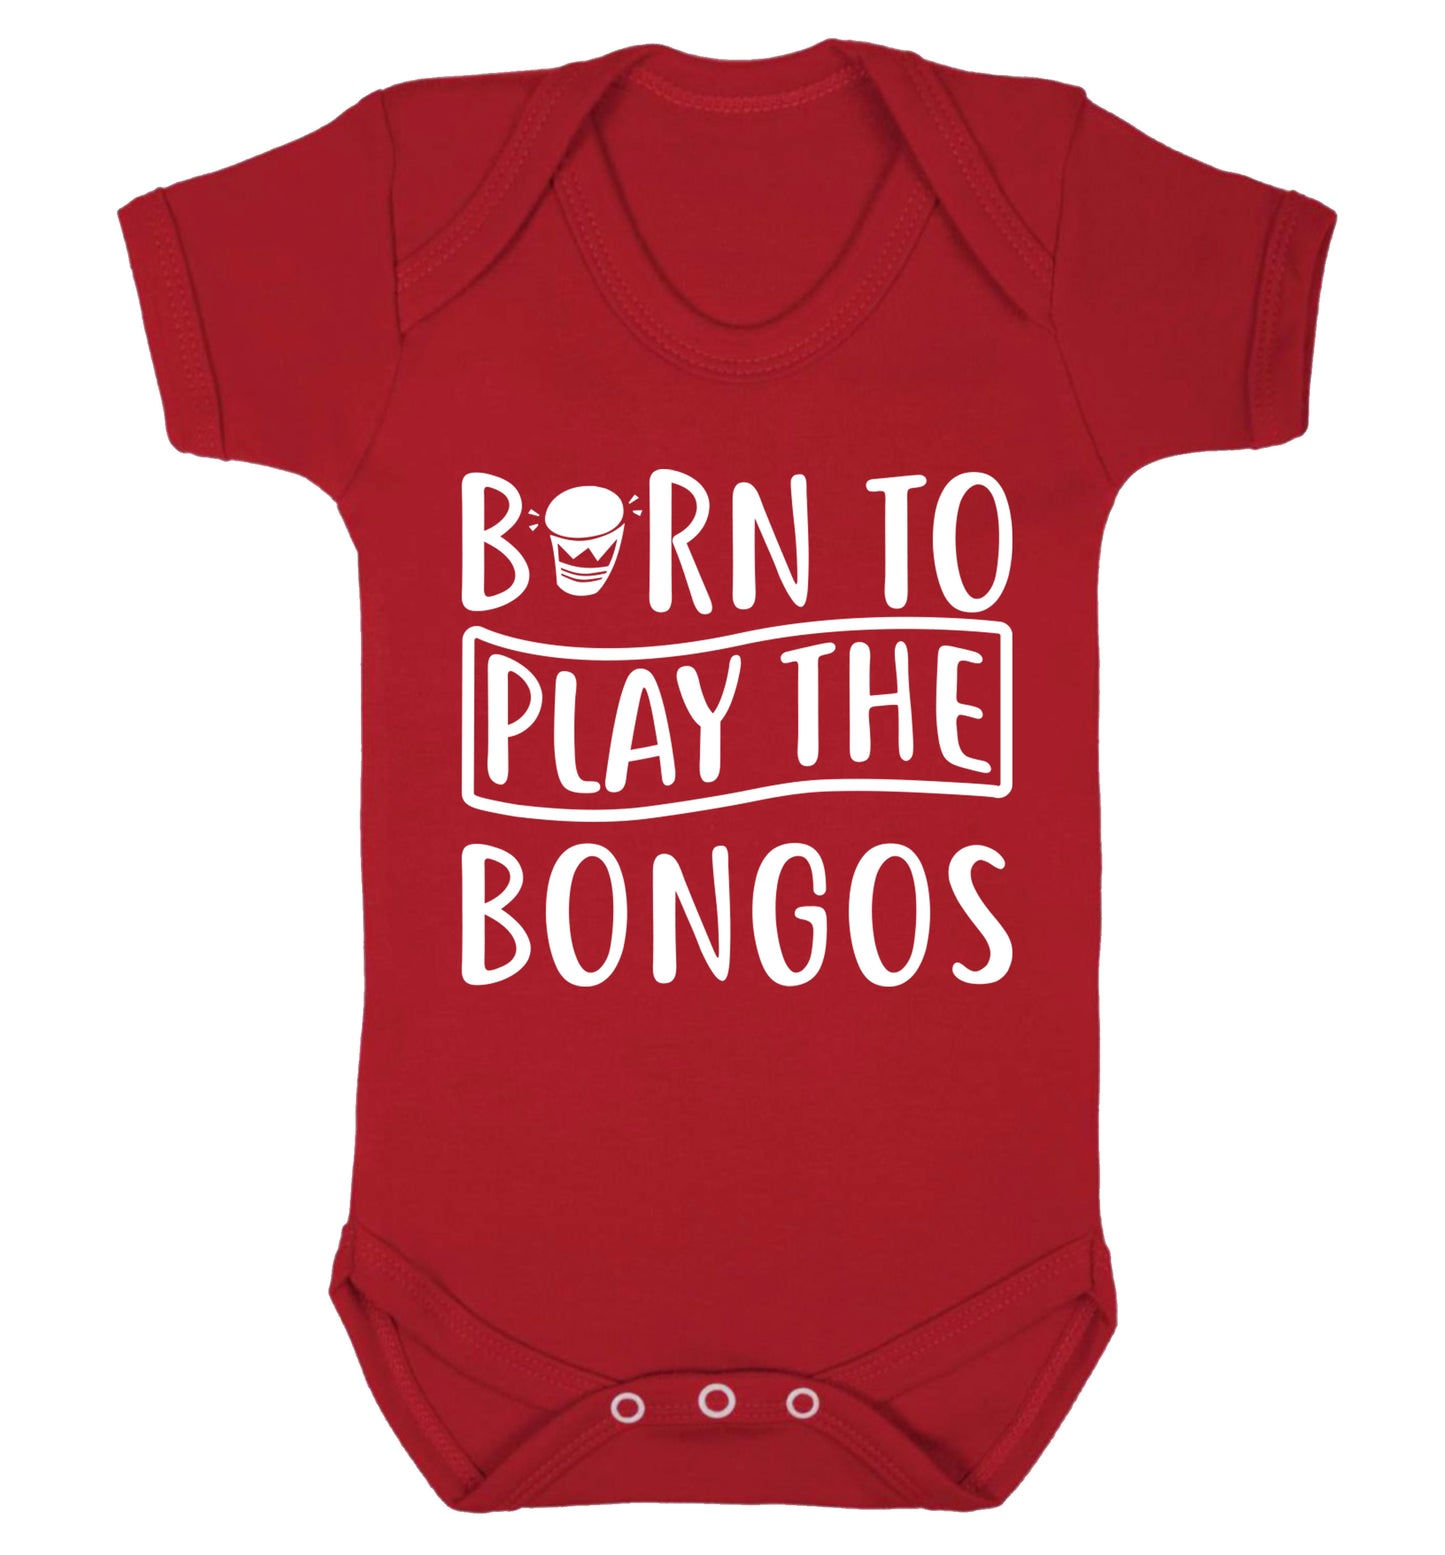 Born to play the bongos Baby Vest red 18-24 months